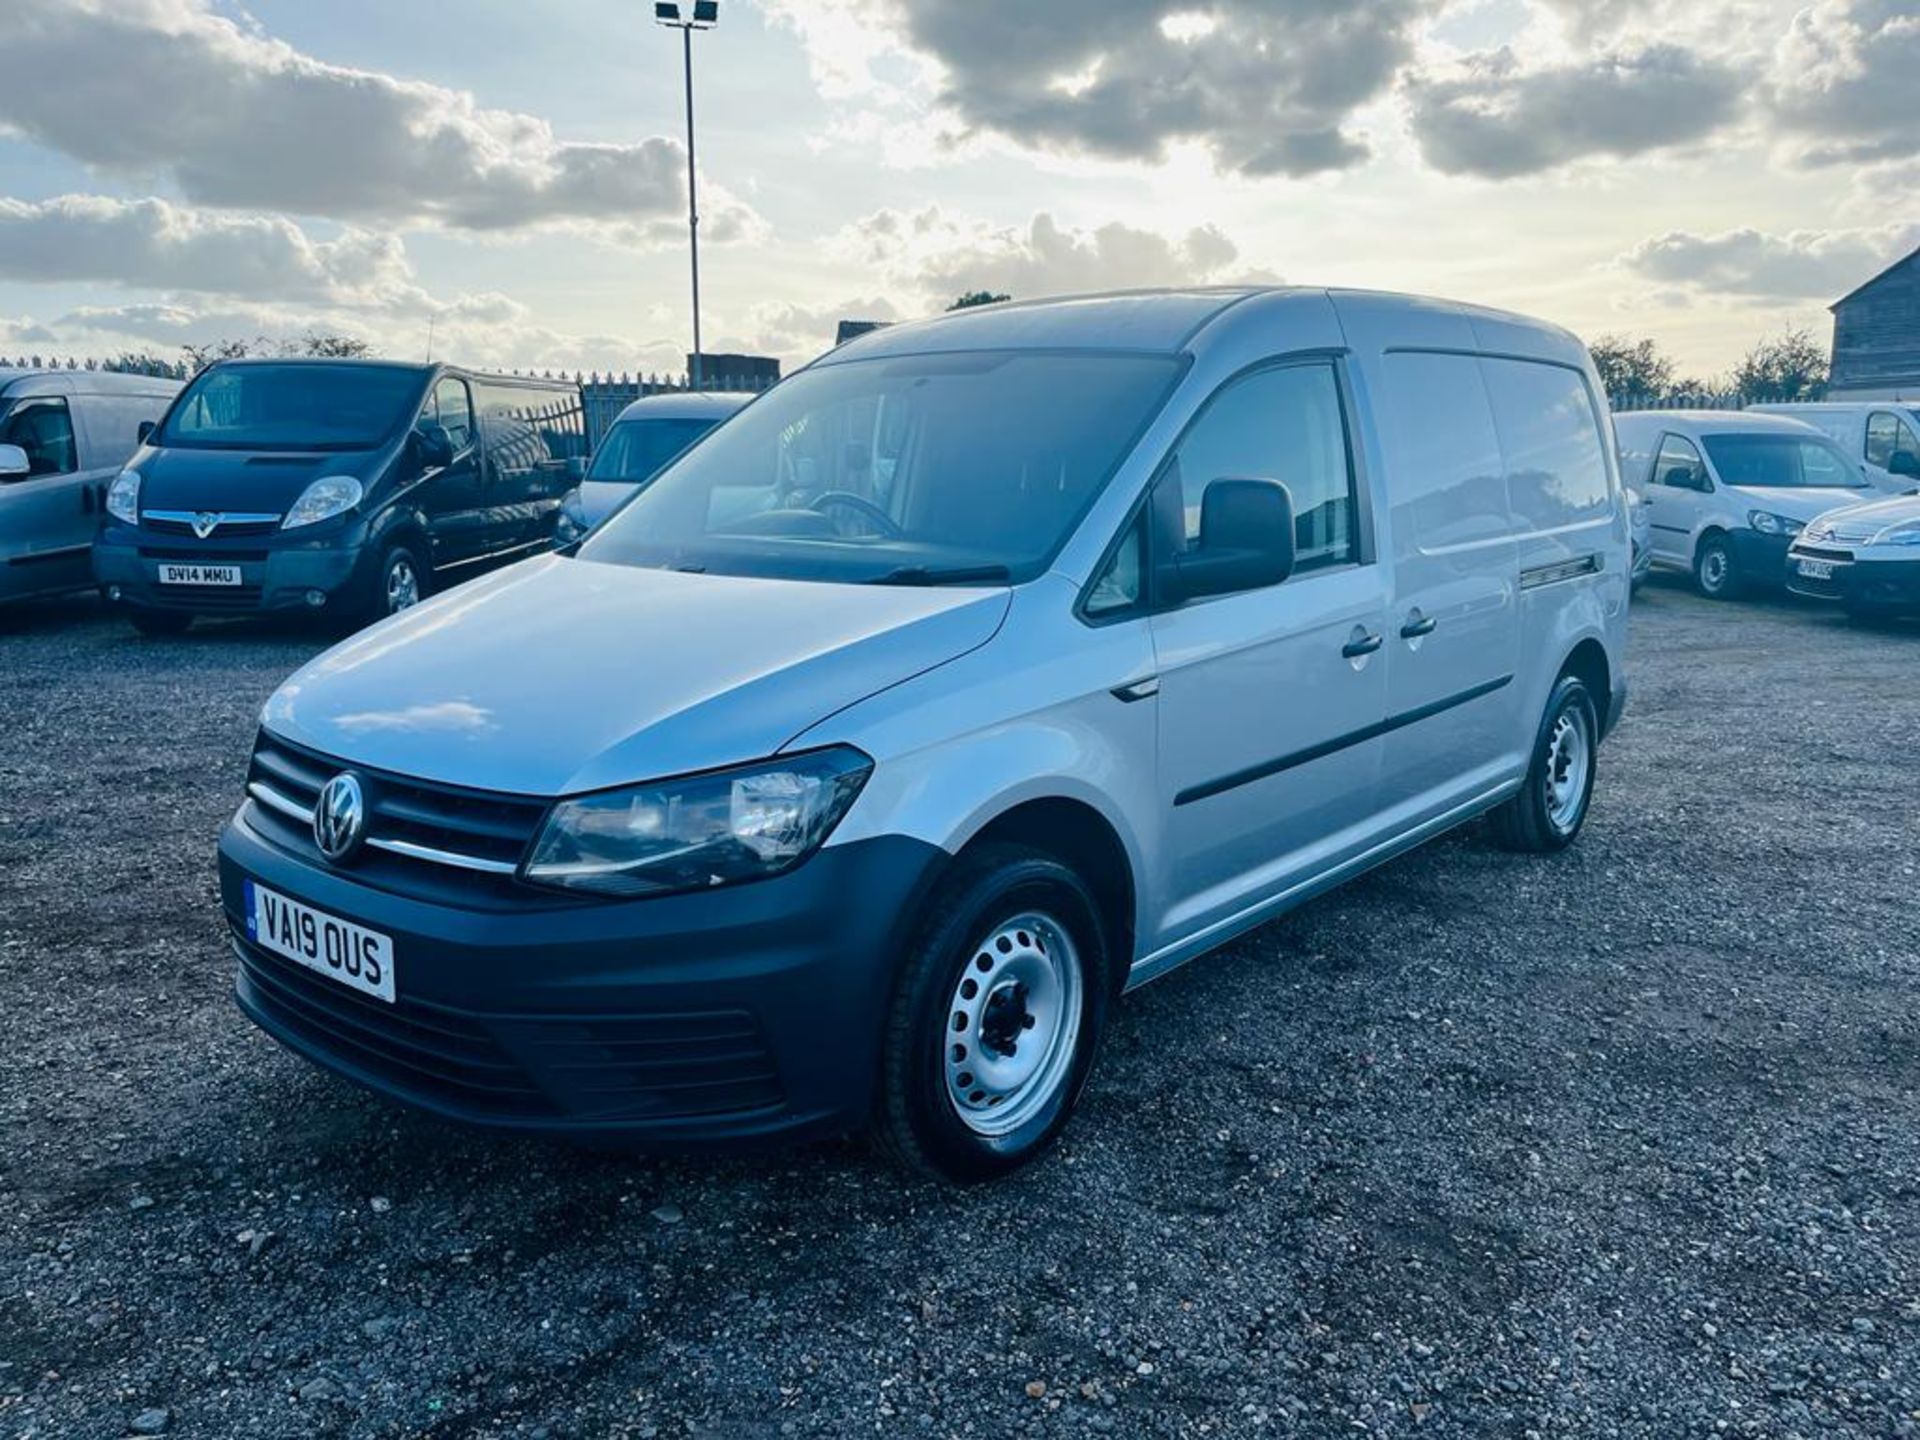 ** ON SALE ** Volkswagen Caddy Maxi C20 2.0 TDI 102 BMT Startline Automatic 2019 '19 Reg' - A/C - Image 3 of 30